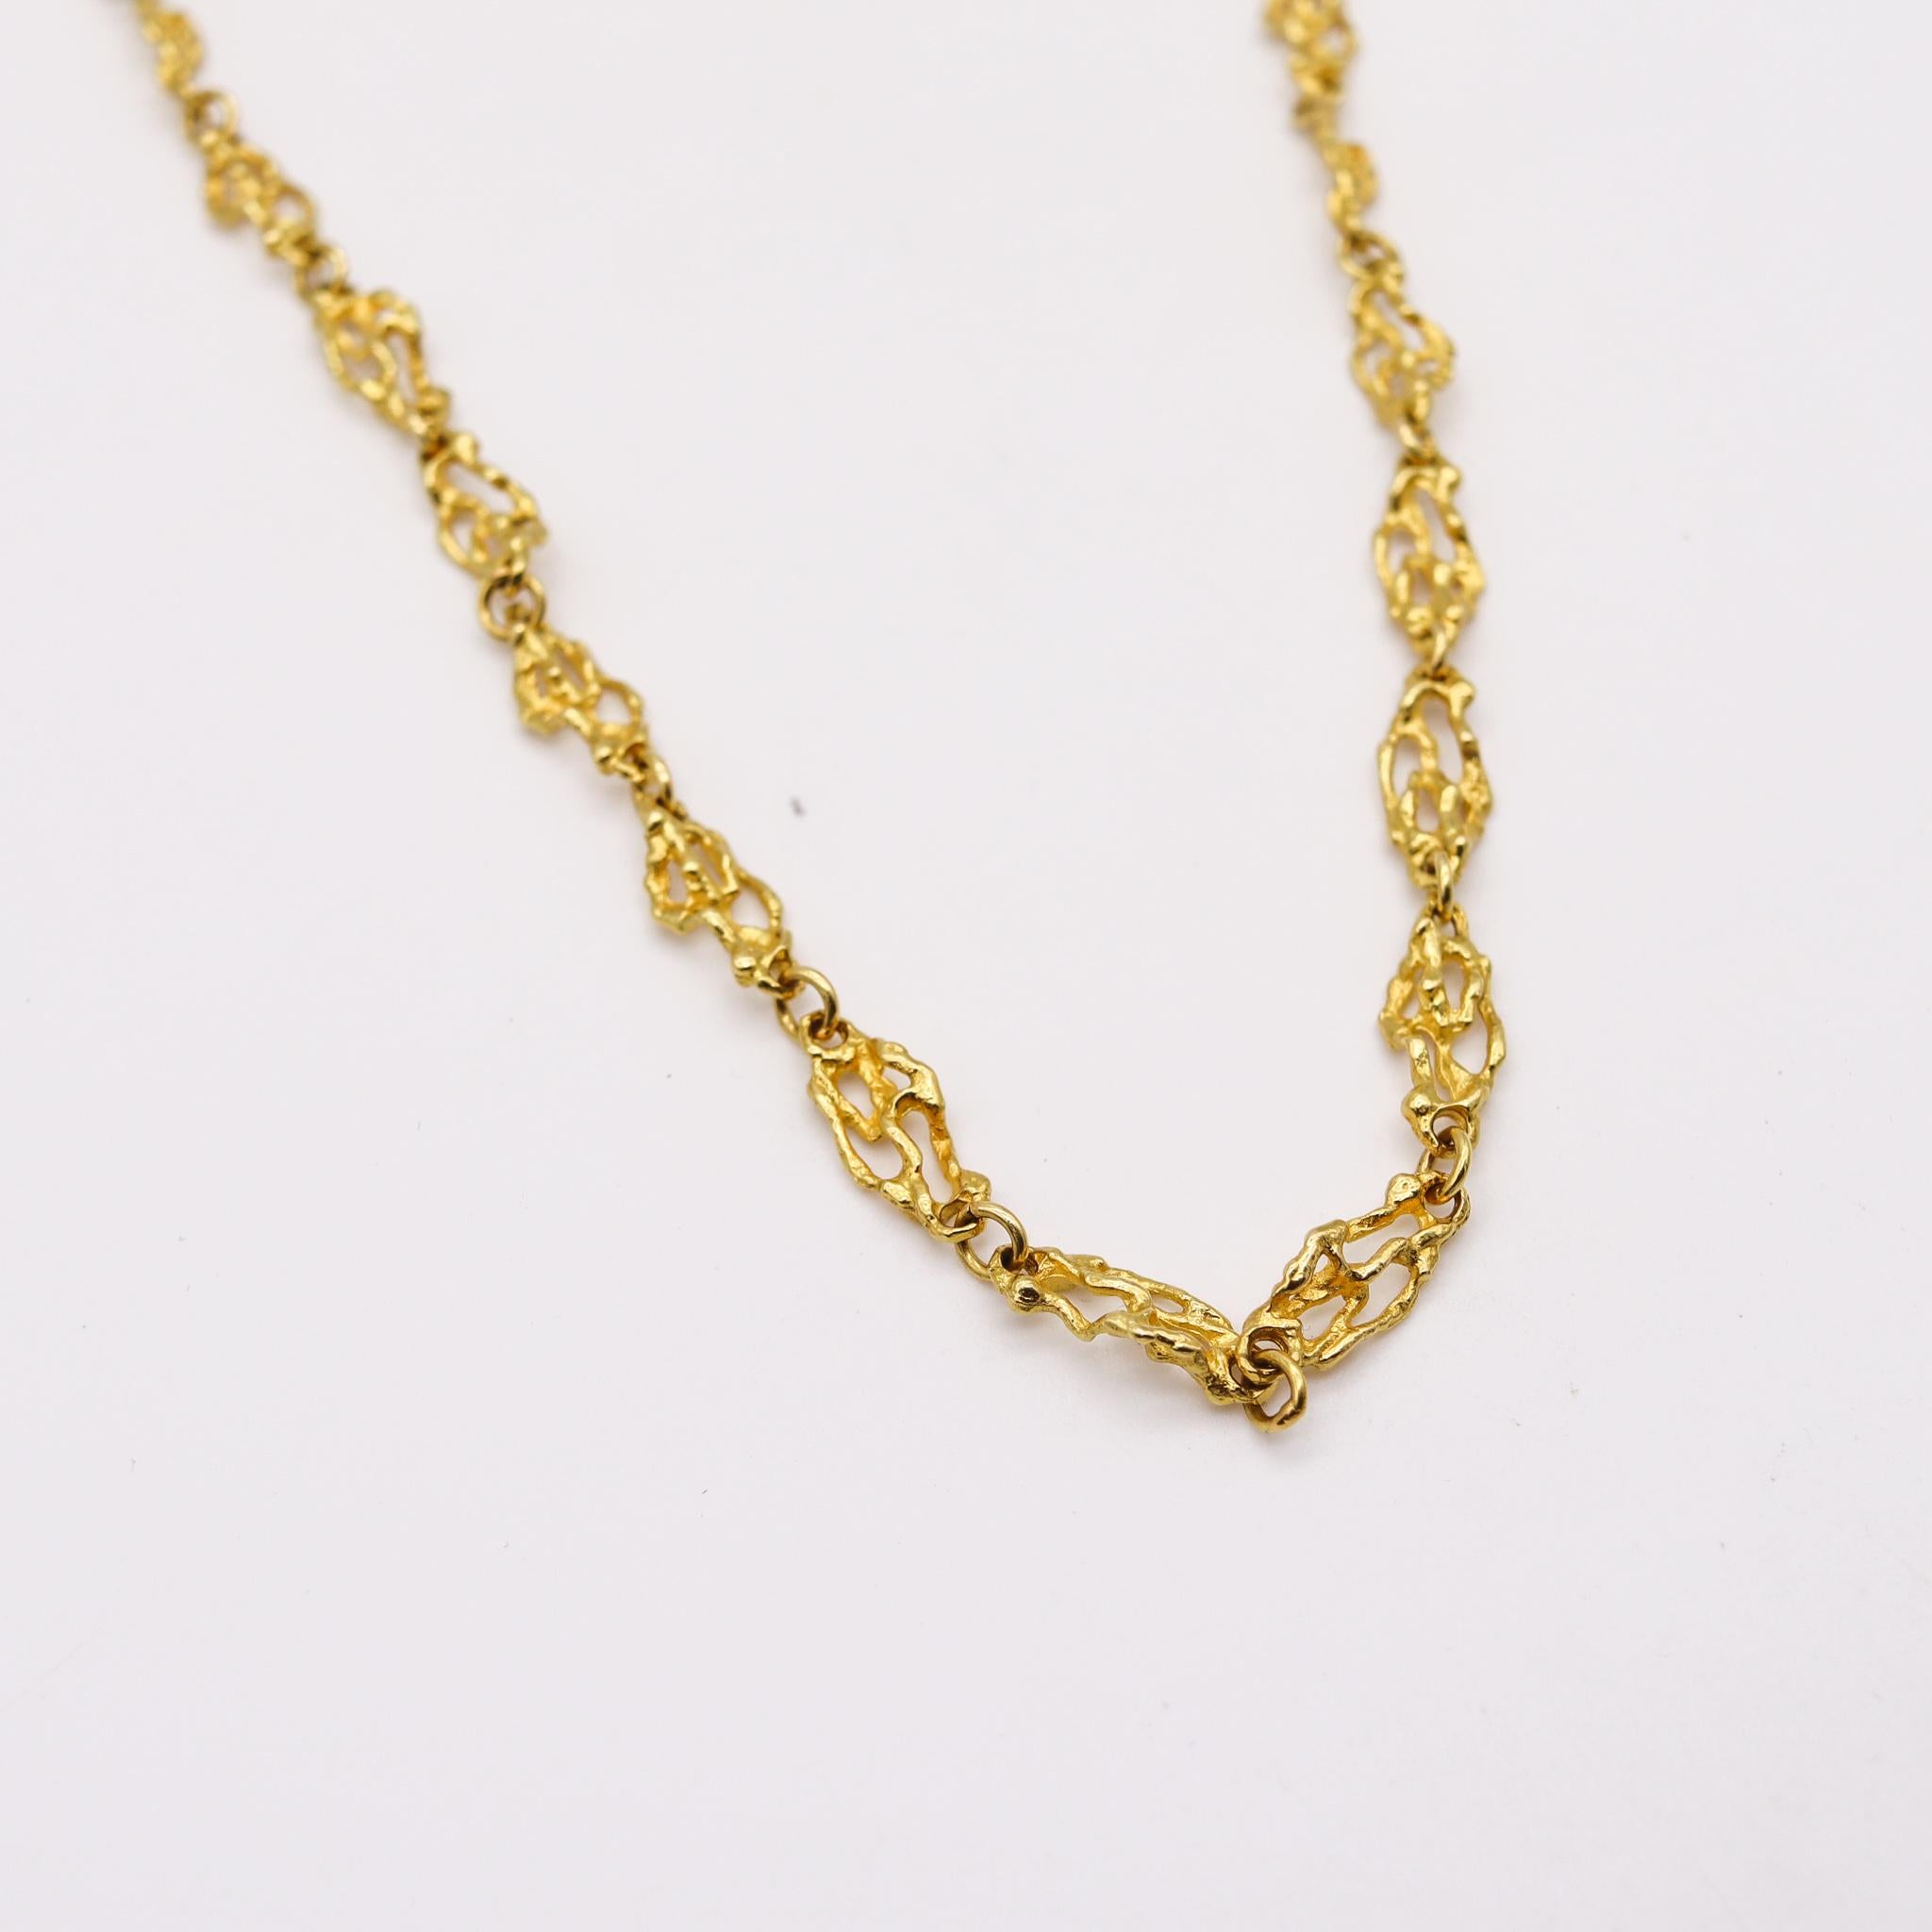 A chain with organic links.

Beautiful retro chain with organic modernist links created in the northern region of Europe, most probably in Switzerland or Germany, back in the 1970. It was crafted in solid yellow gold of 18 karats and fitted with a